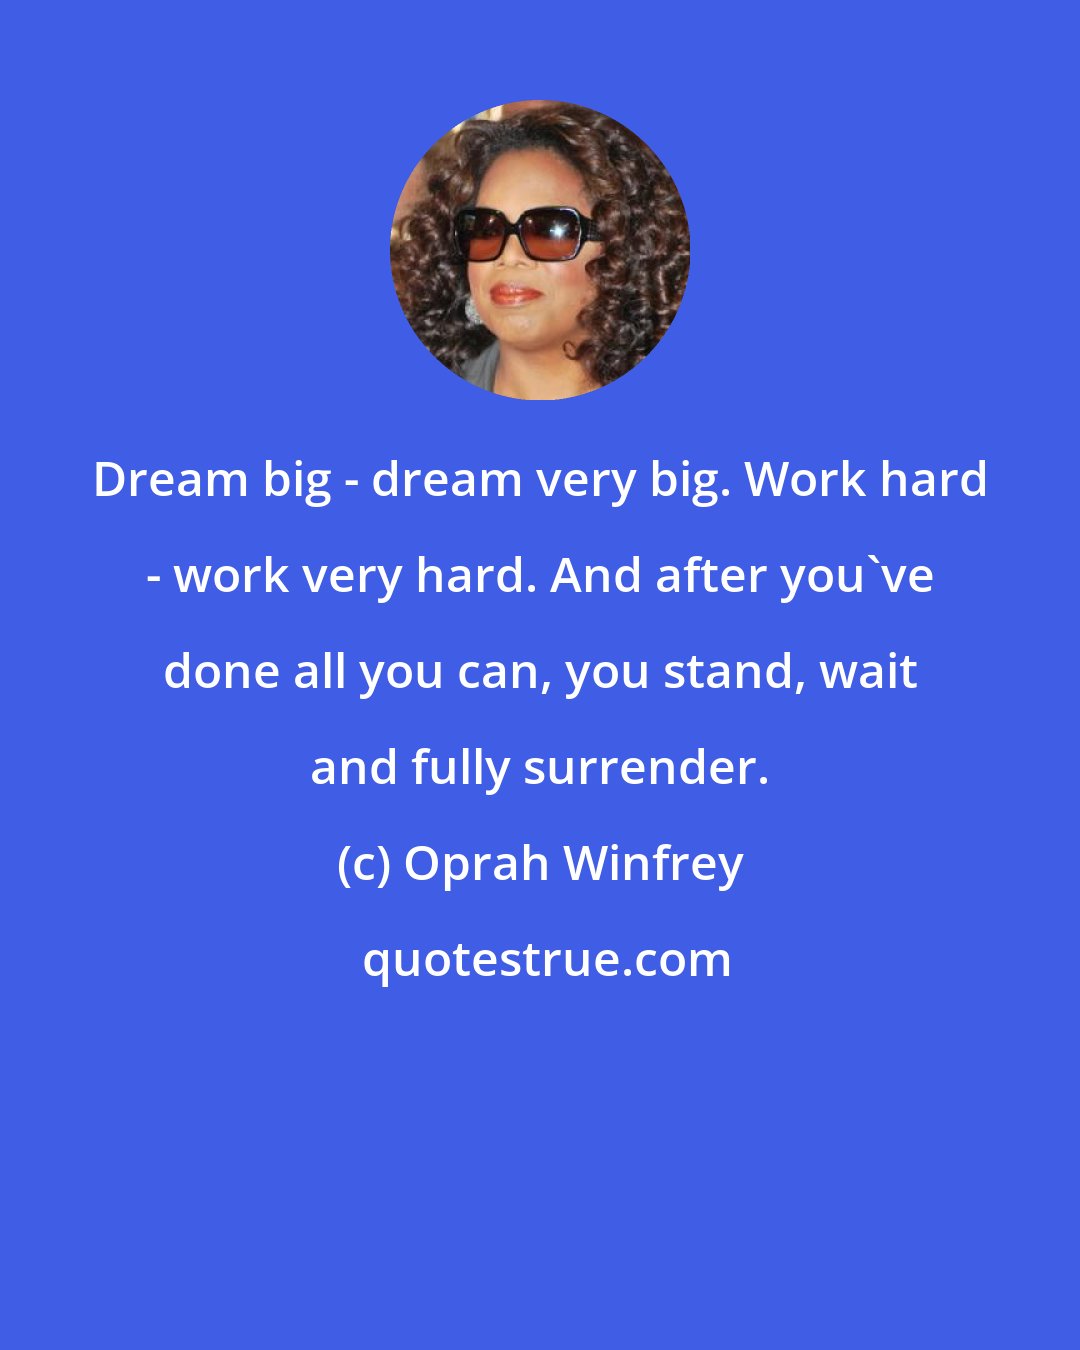 Oprah Winfrey: Dream big - dream very big. Work hard - work very hard. And after you've done all you can, you stand, wait and fully surrender.